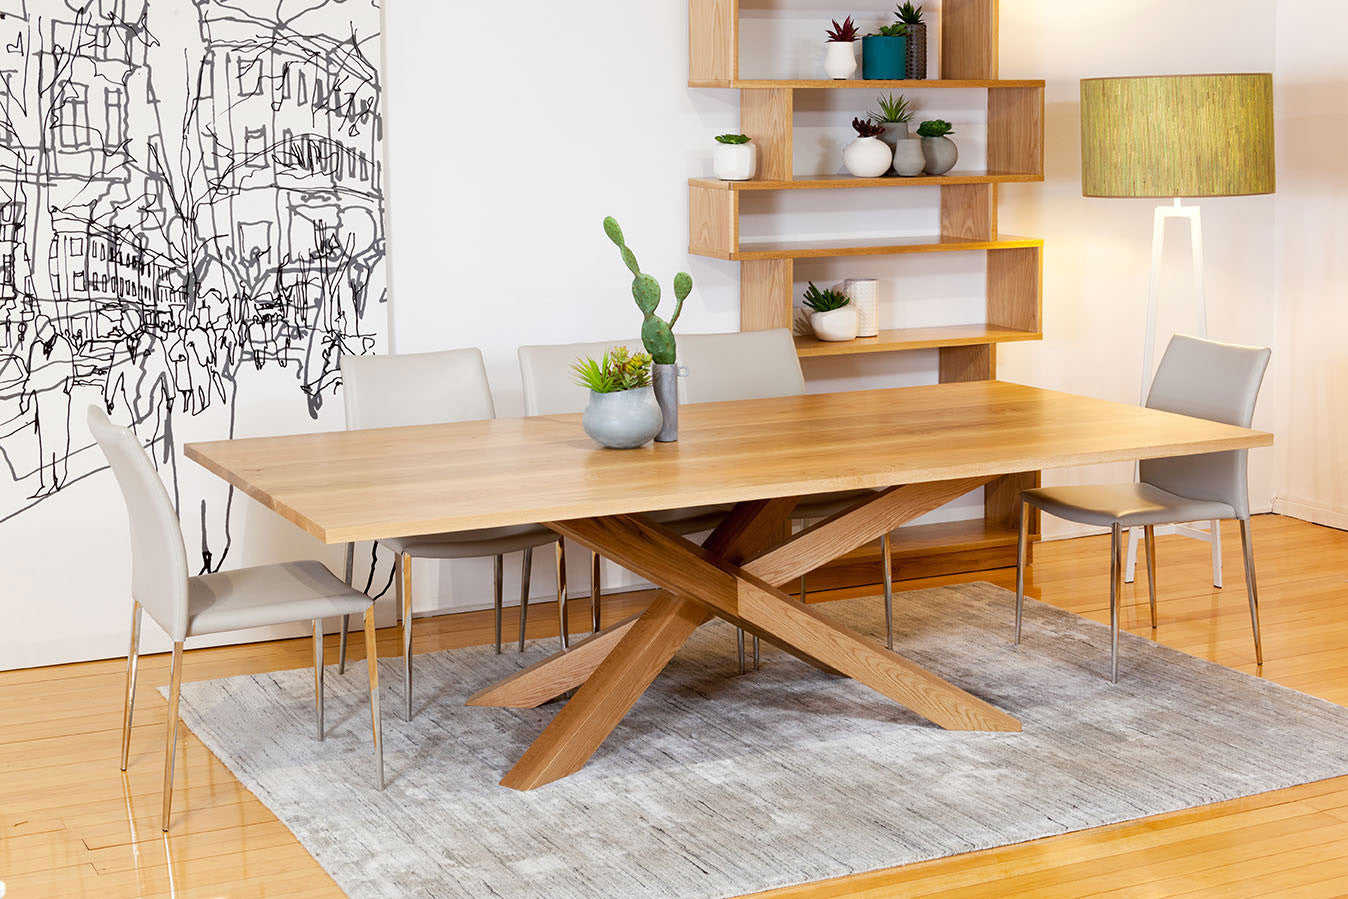 Spinifex Solid American Oak Contemporary Dining Table Bespoke